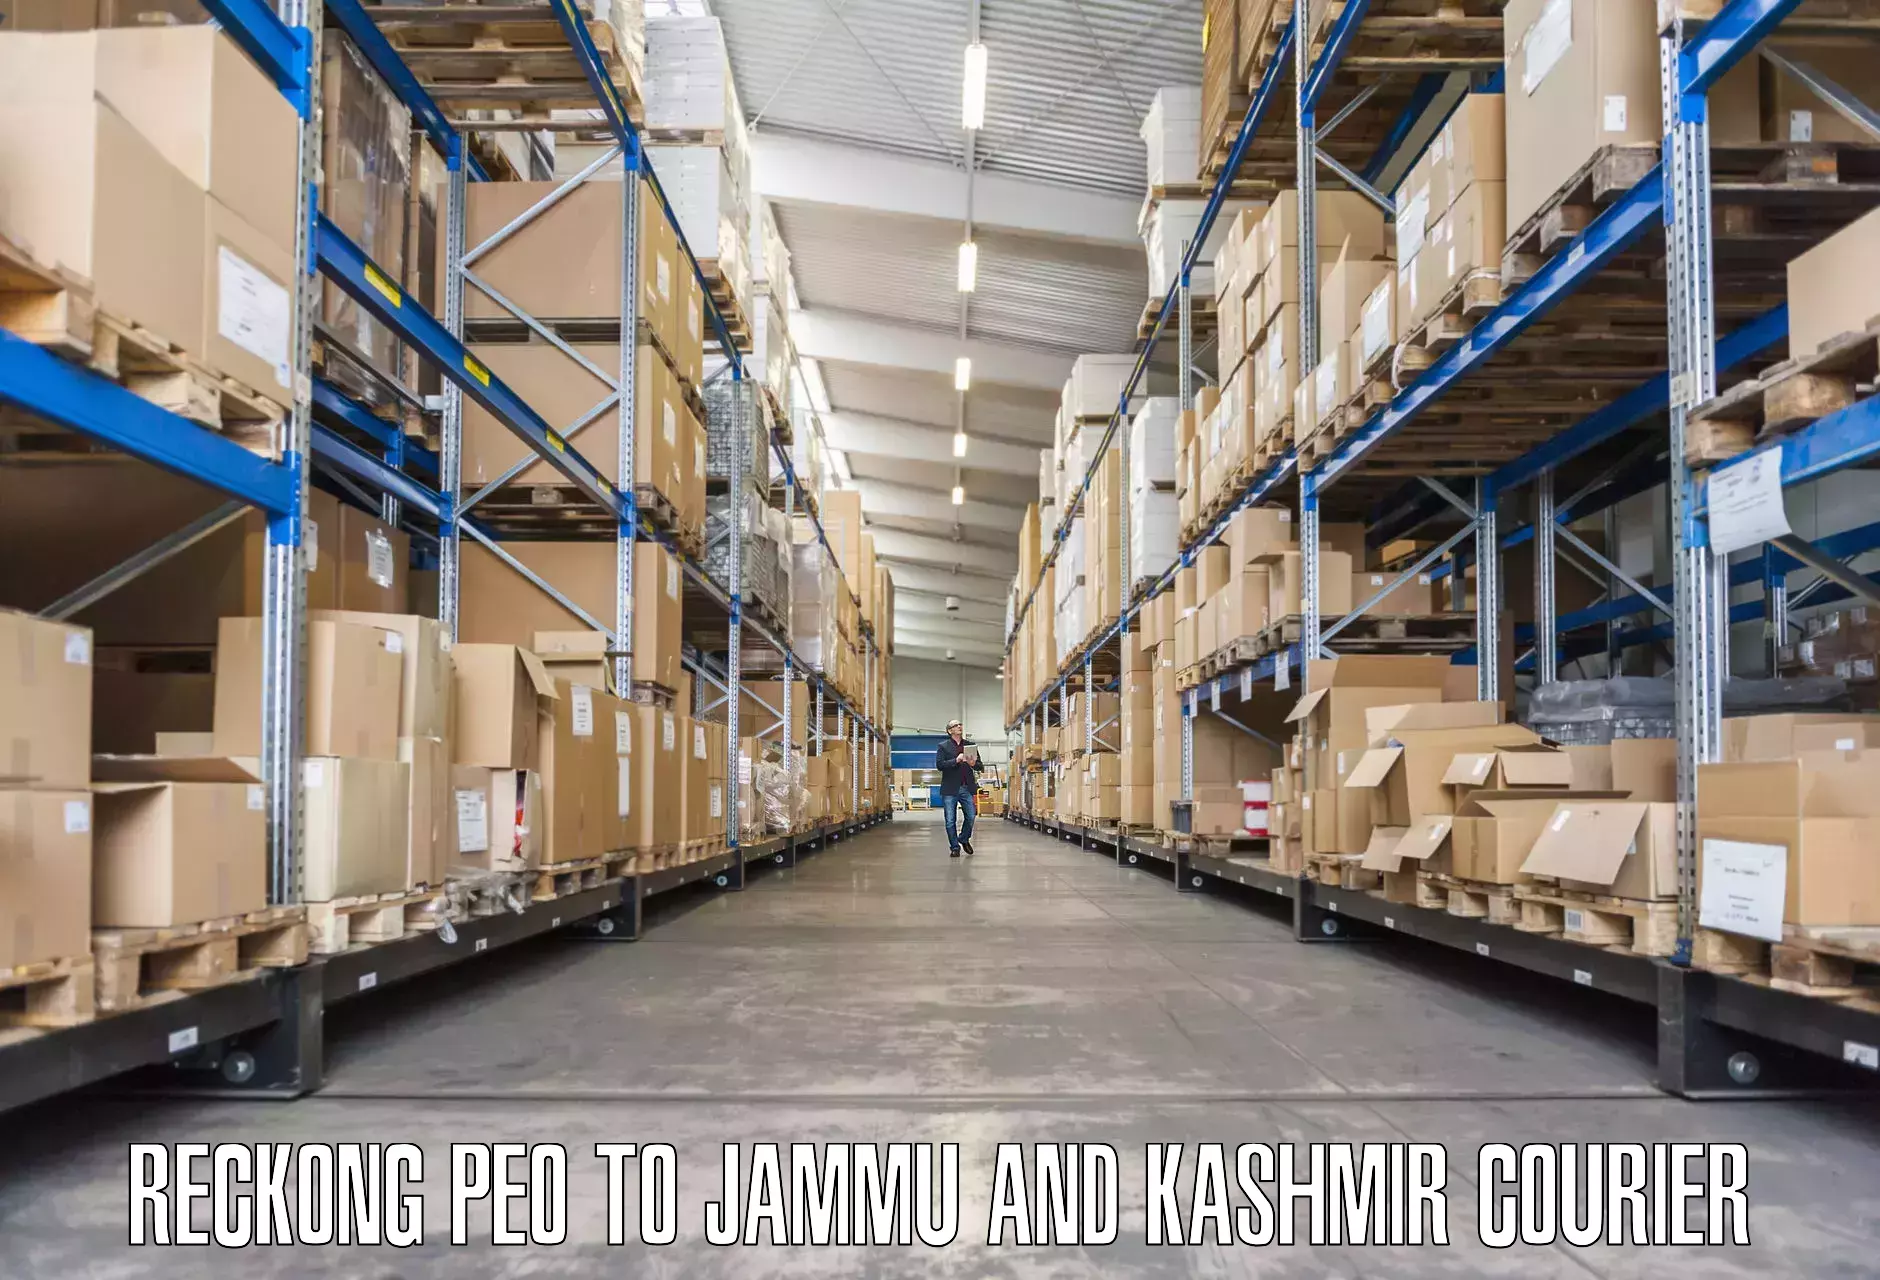 Trusted furniture movers Reckong Peo to Baramulla